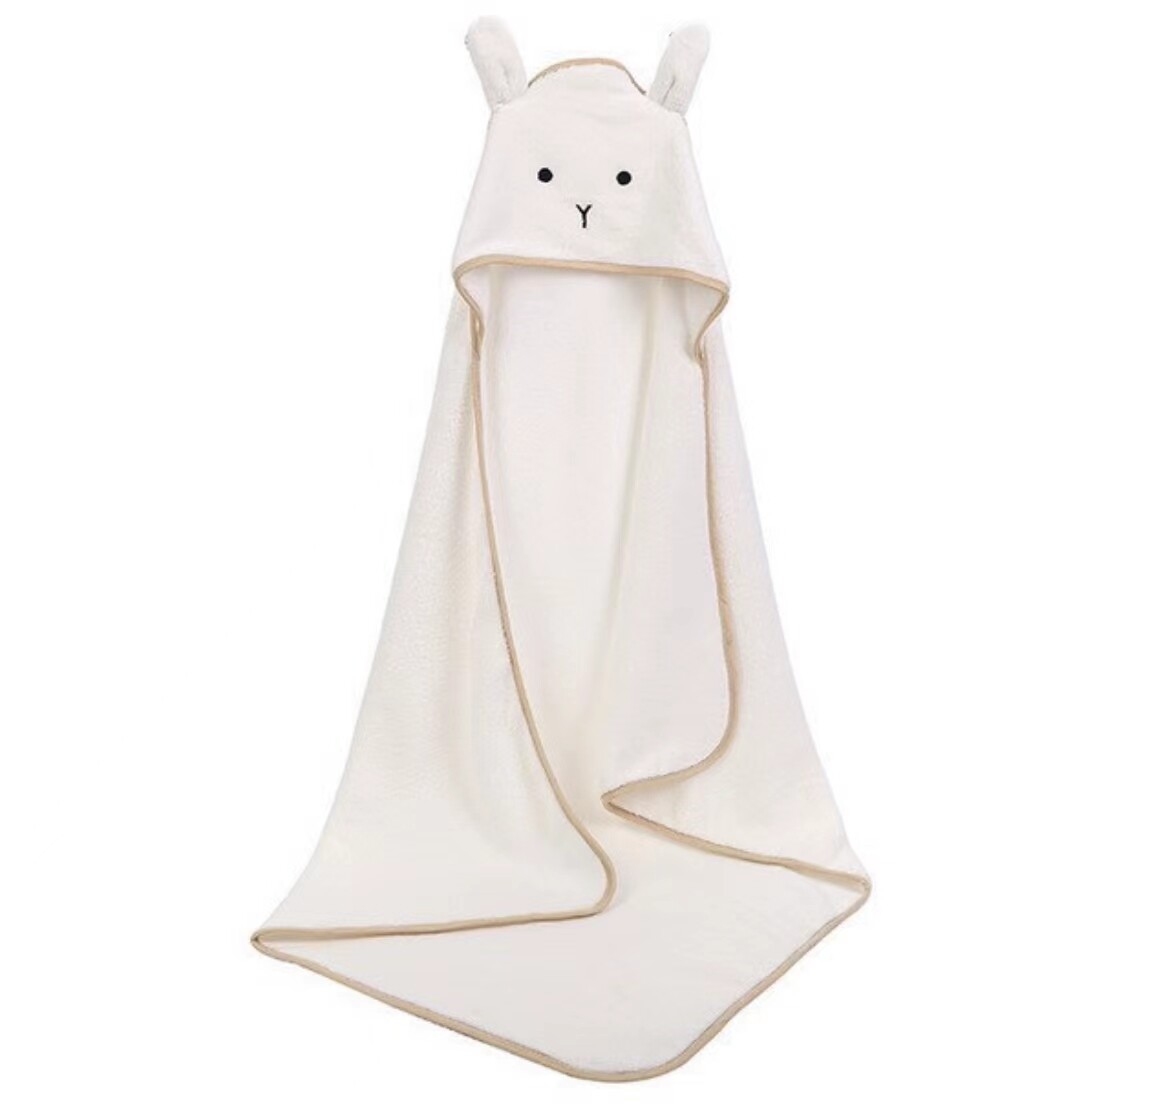 baby animal hooded towels,animal hooded towels for toddlers